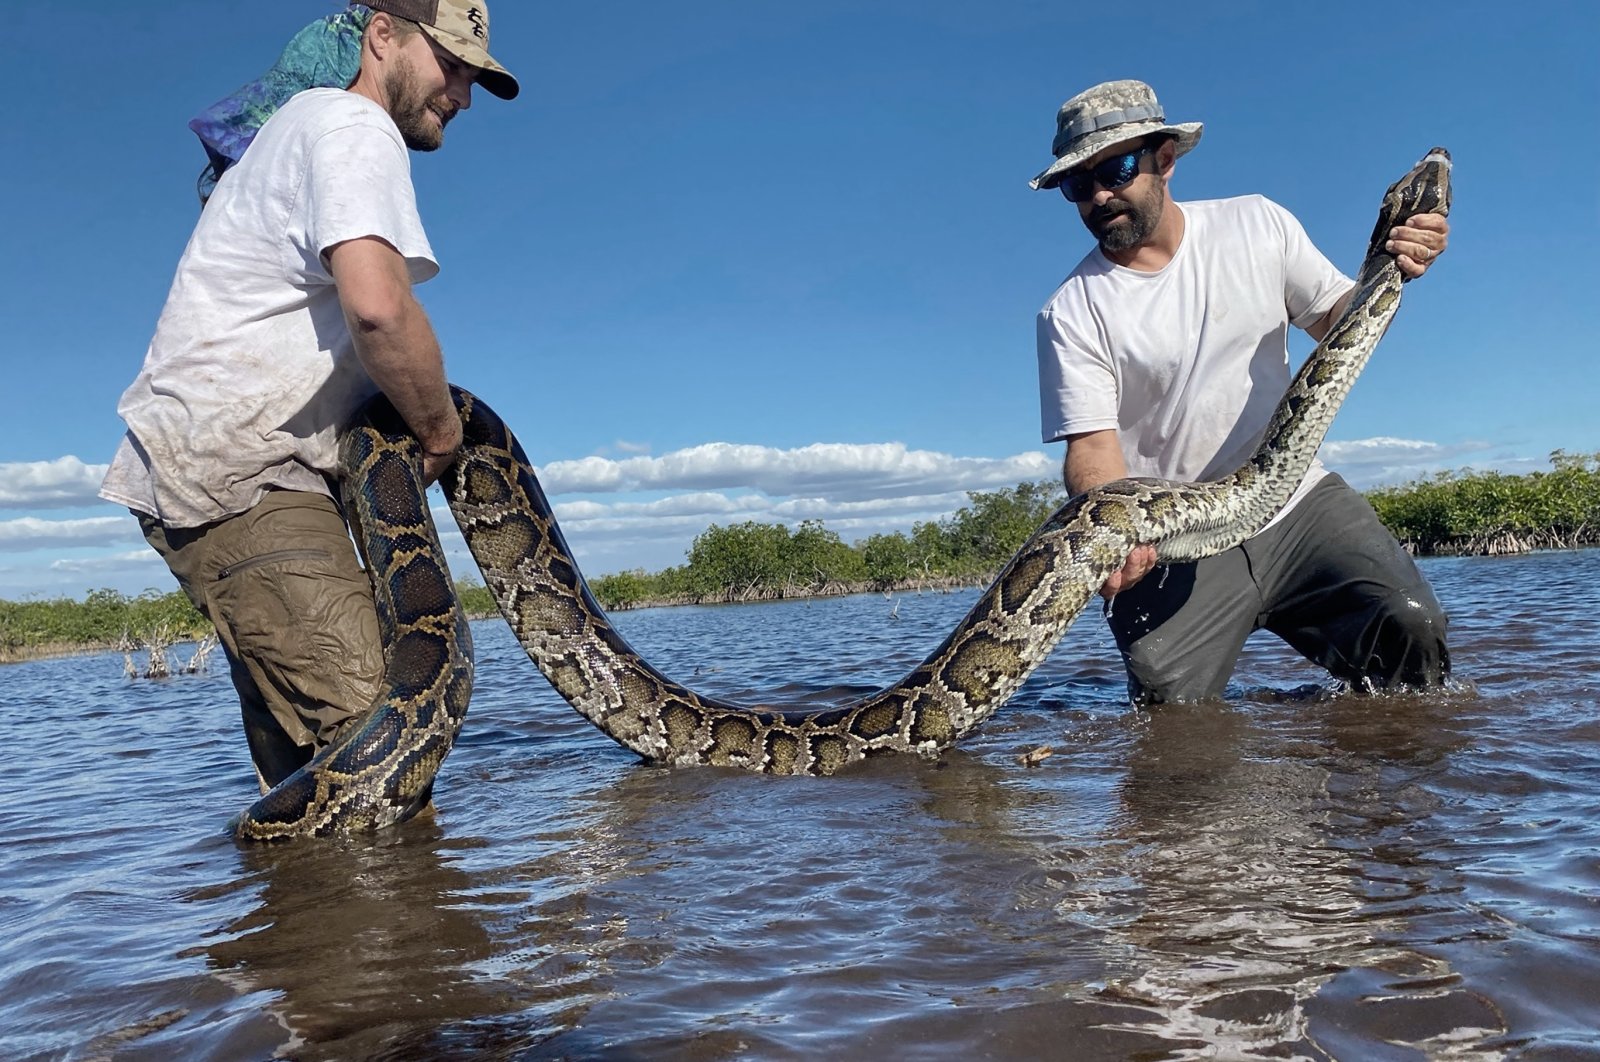 The photo provided by the Conservancy of Southwest Florida shows biologists Ian Easterling (L) and Ian Bartoszek with a 14-foot female Burmese python captured in the mangrove habitat of southwestern Florida, U.S., Jan. 19, 2022. (AP Photo)